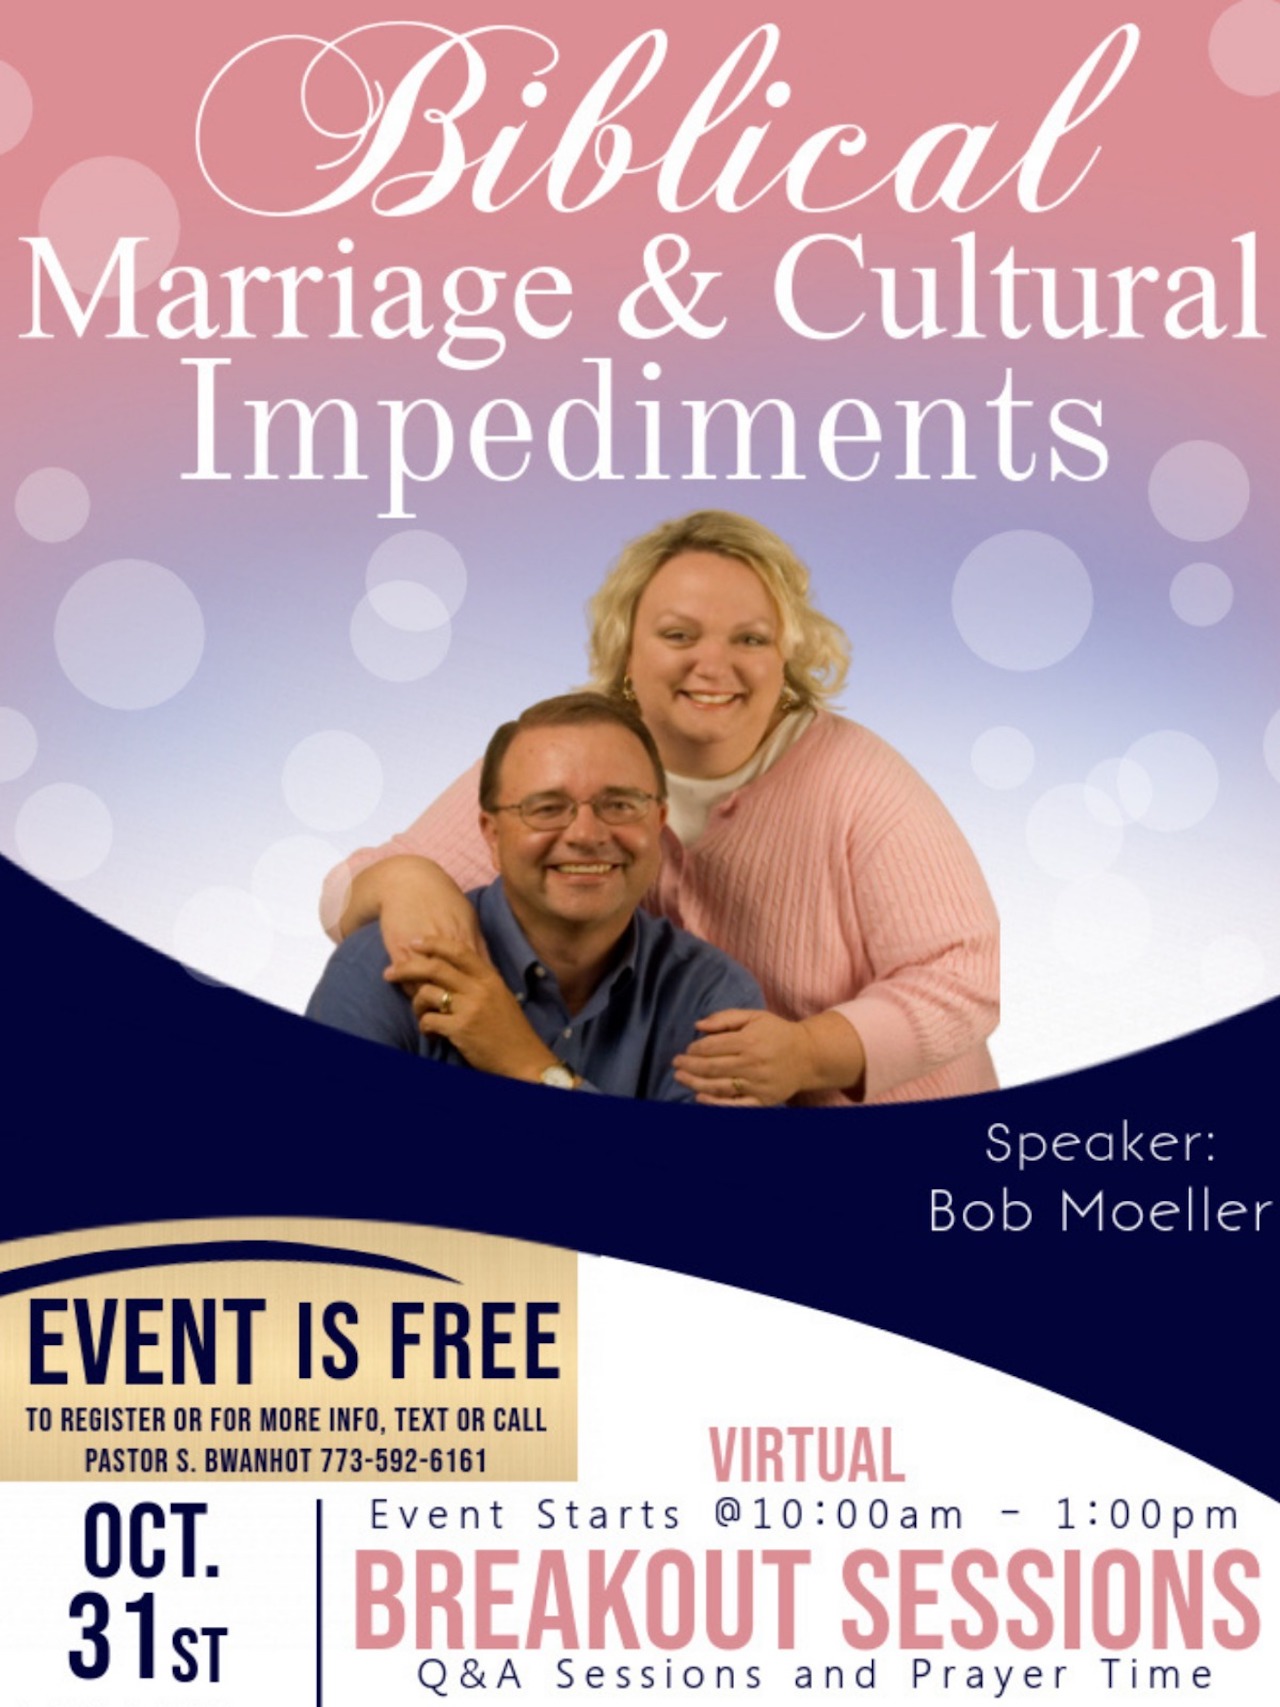 A Virtual Marriage Event You Cannot Afford to Miss: Biblical Marriage & Cultural Impediments